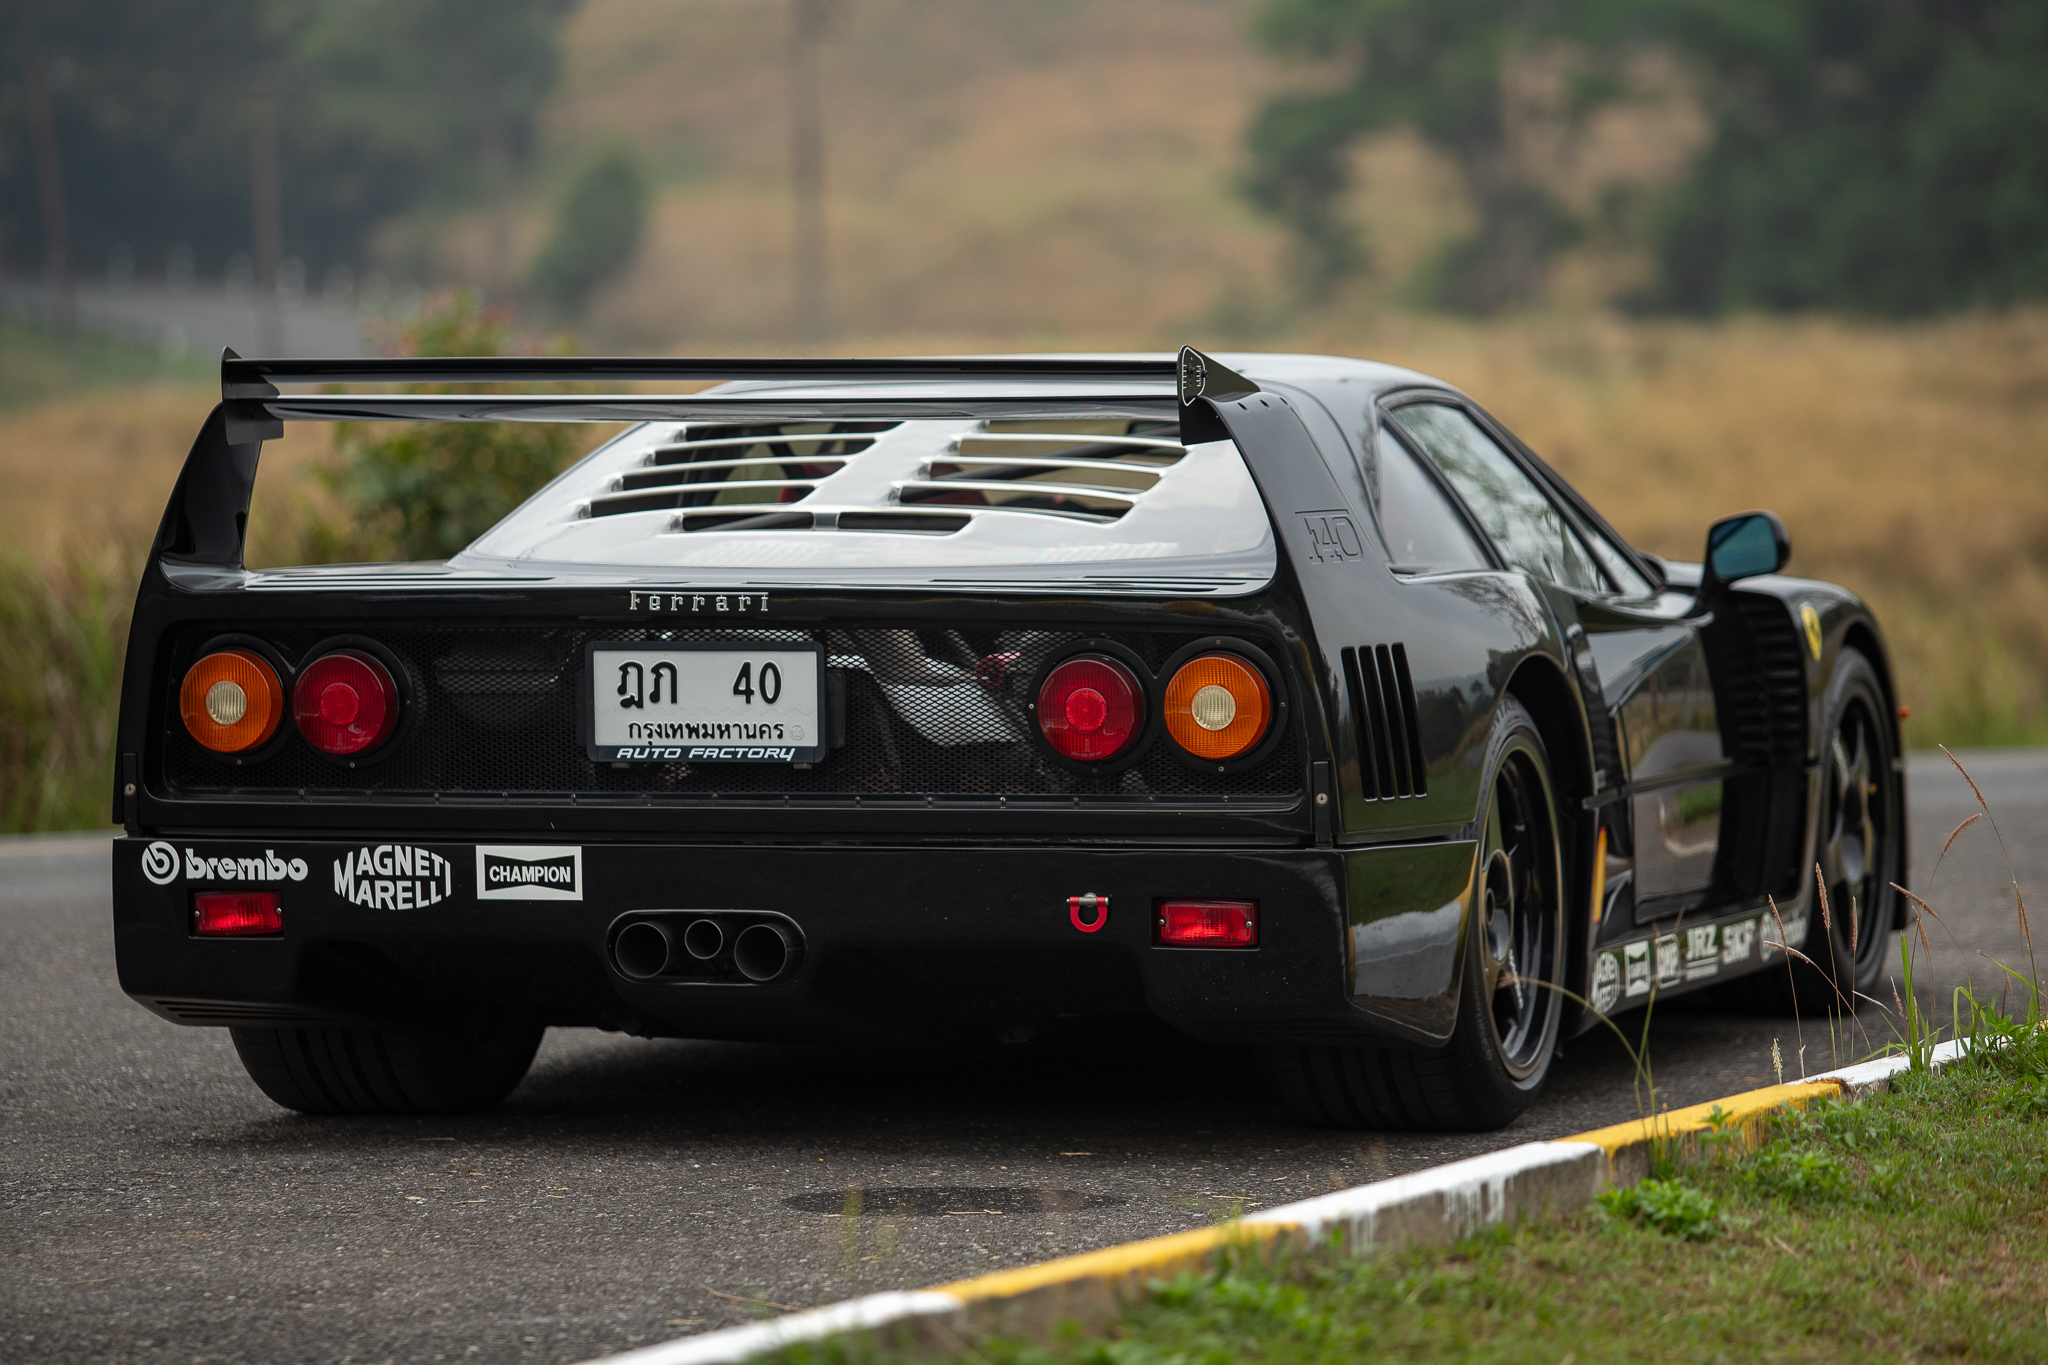 1989 Ferrari F40 for sale by auction in Bangkok, Thailand